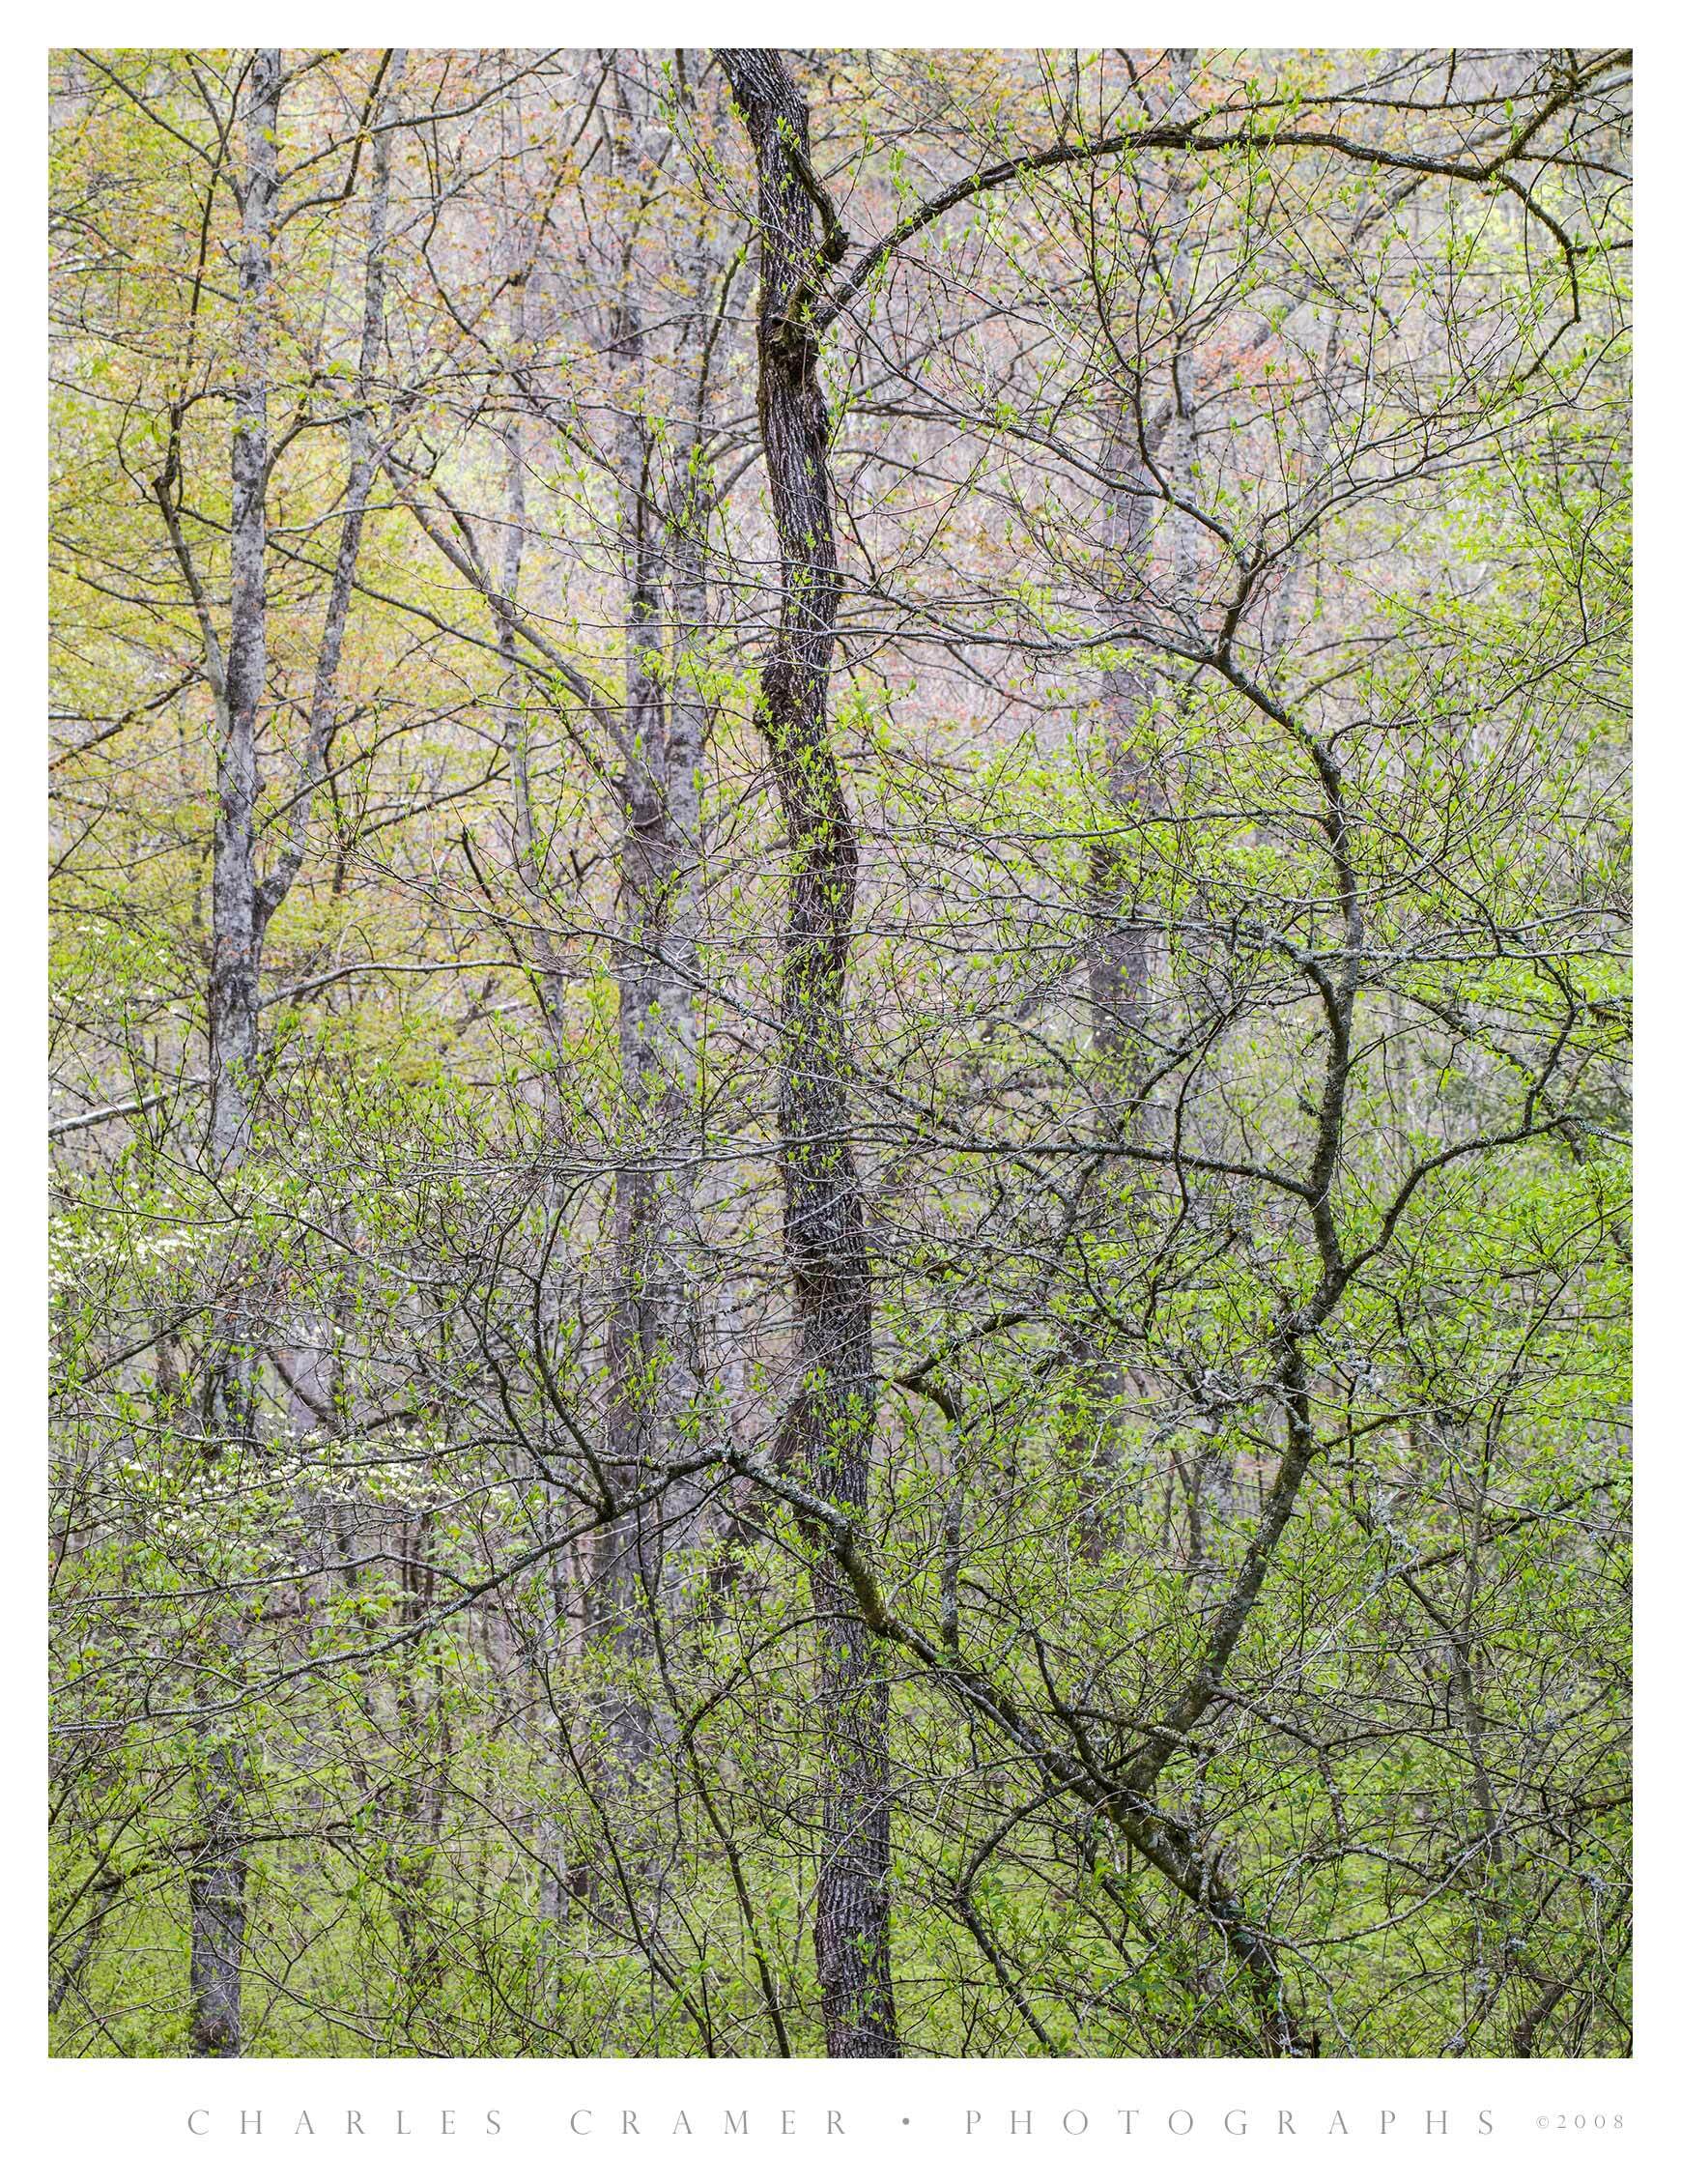 Tree Branch Shapes, Spring Foliage, Great Smoky Mountains